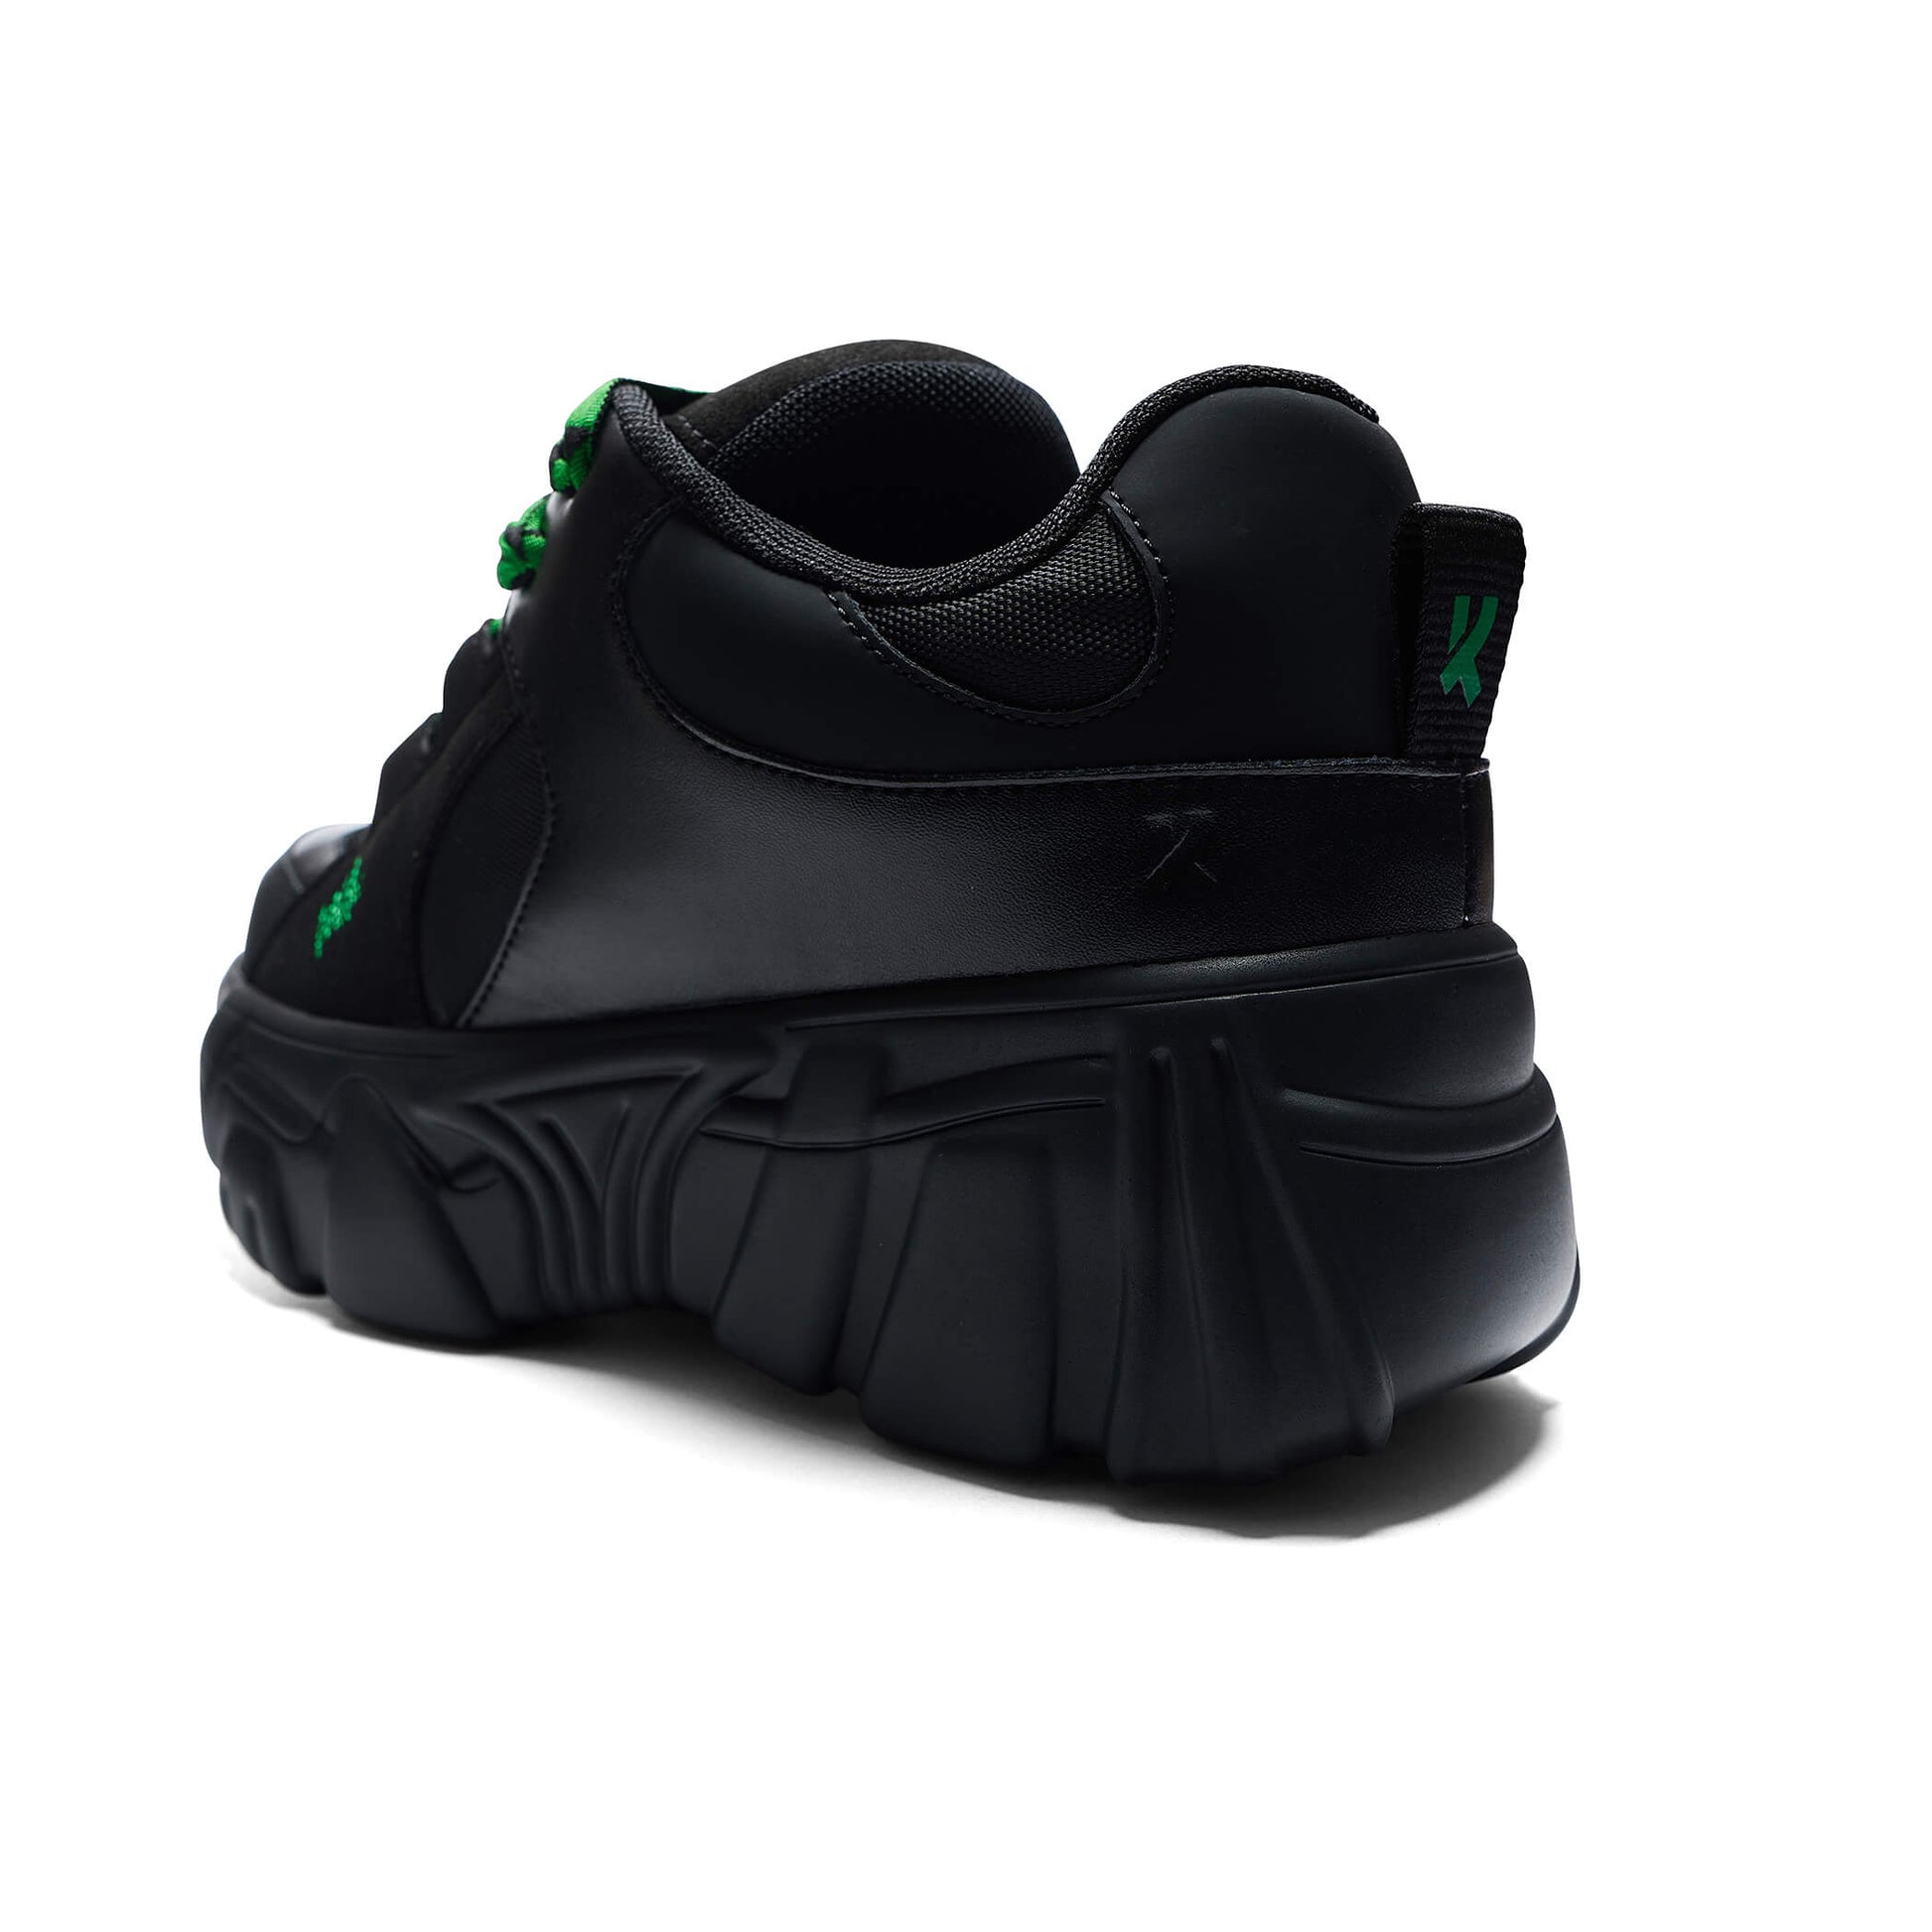 Ricta Flip Chunky Trainers - Green Lace - Trainers - KOI Footwear - Black - Back Detail